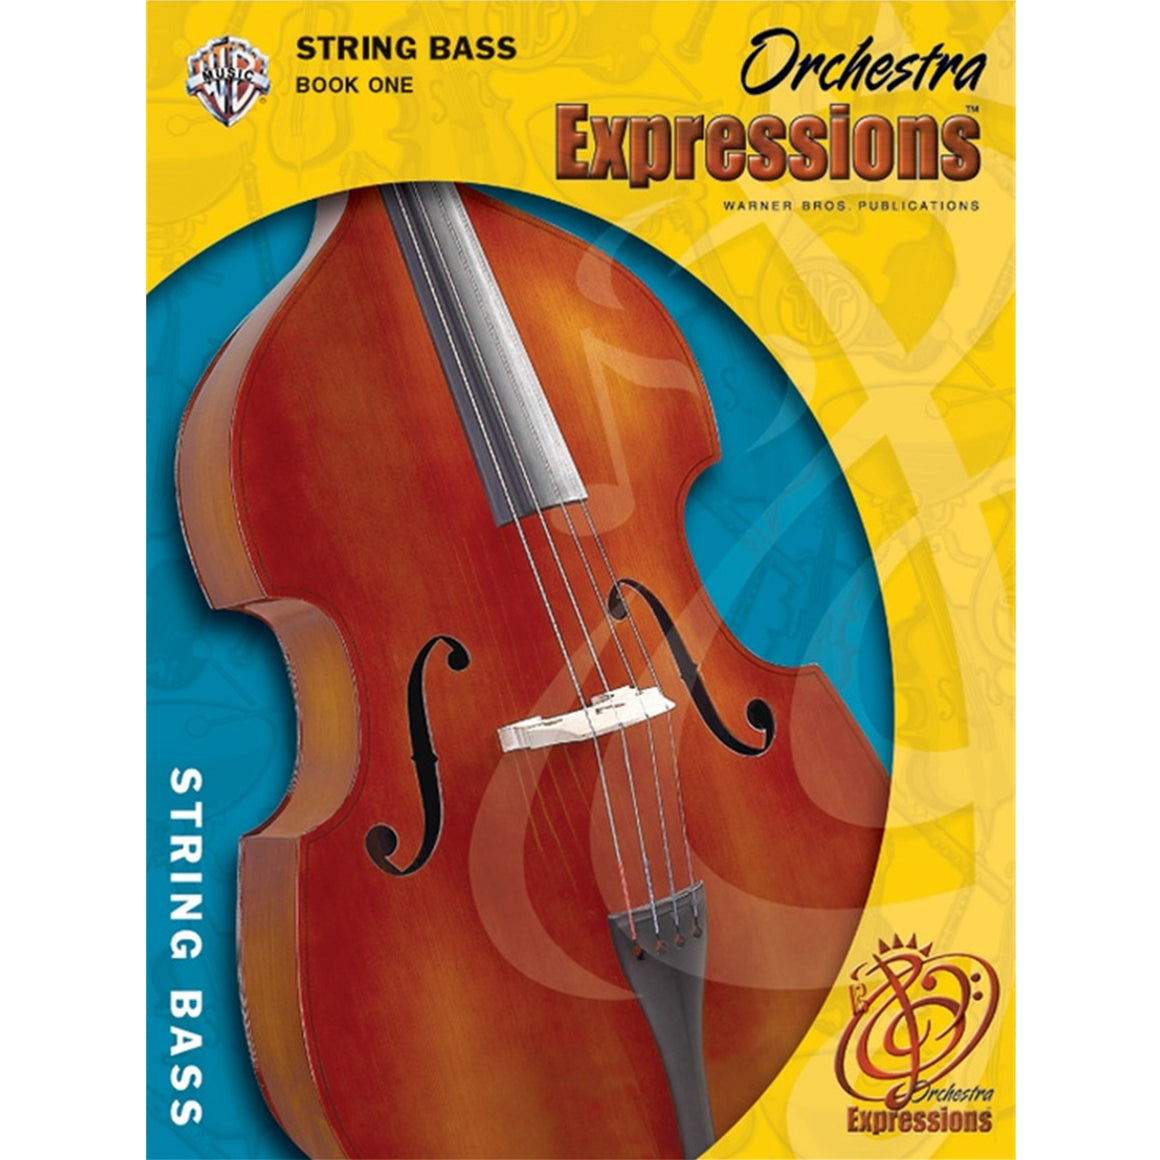 ALFRED 00EMCO1005CD Orchestra Expressions, Book One: String Bass